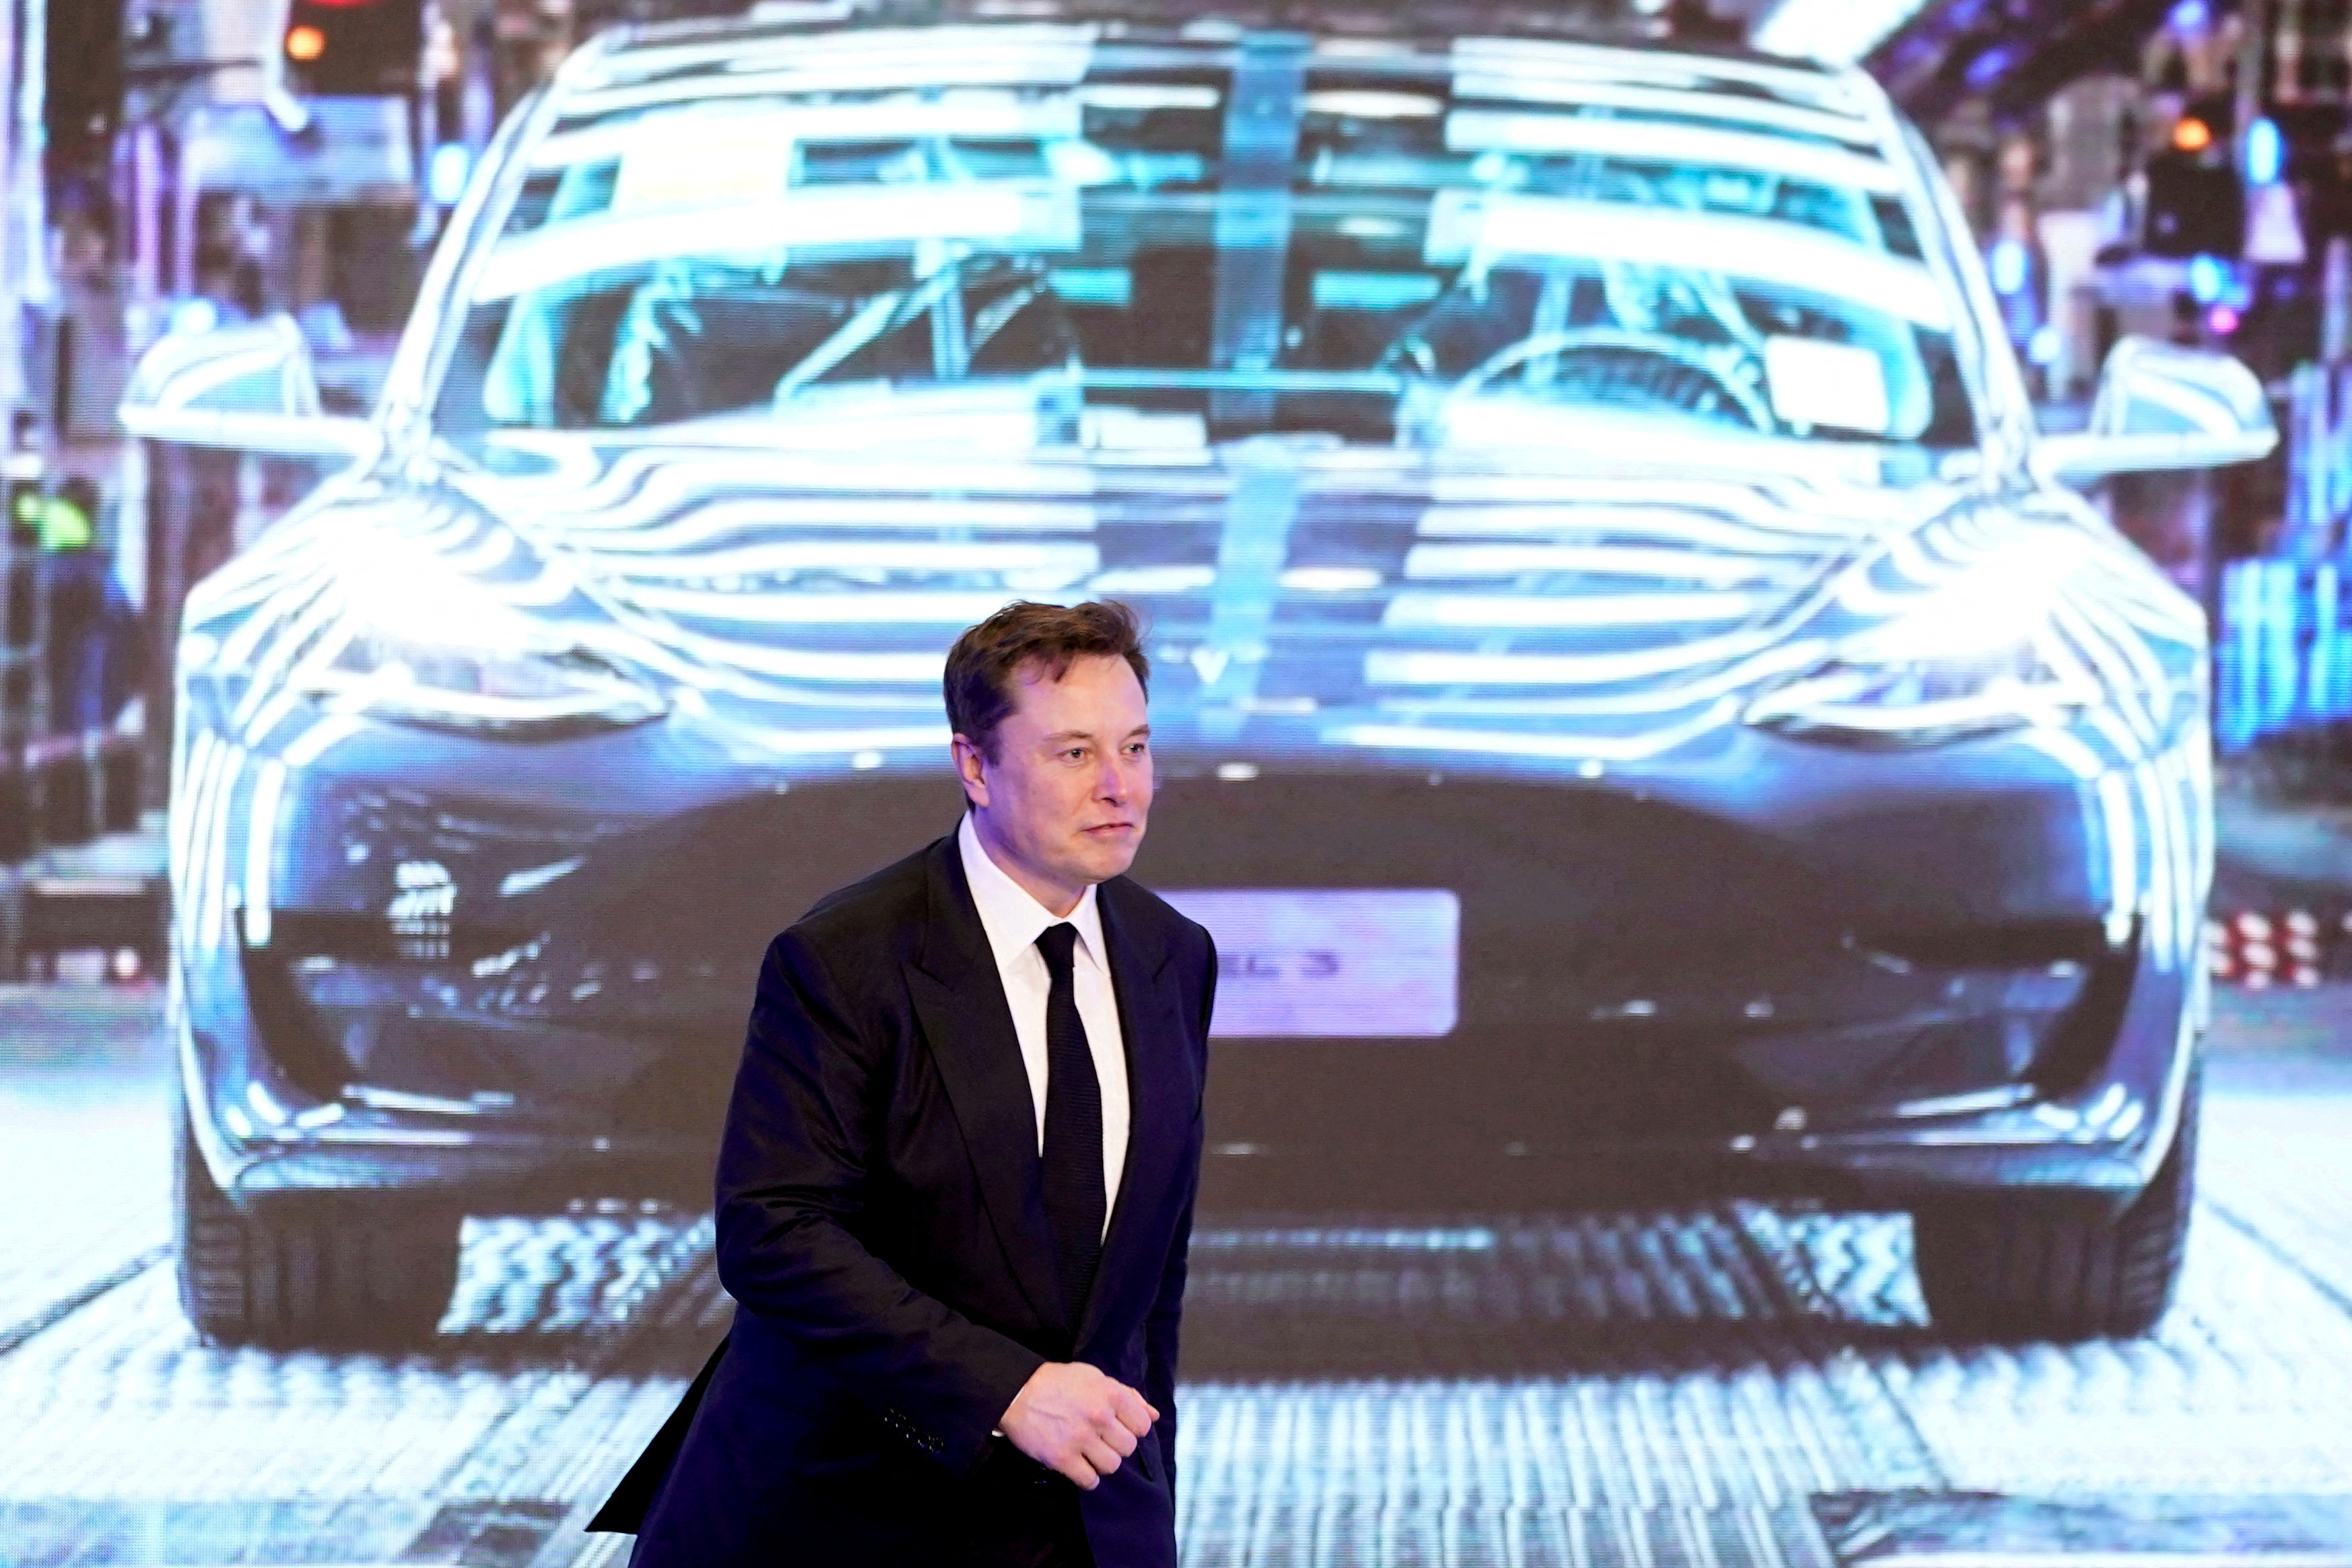 Elon Musk Bolsters Funds By Selling Tesla Shares In Case He is